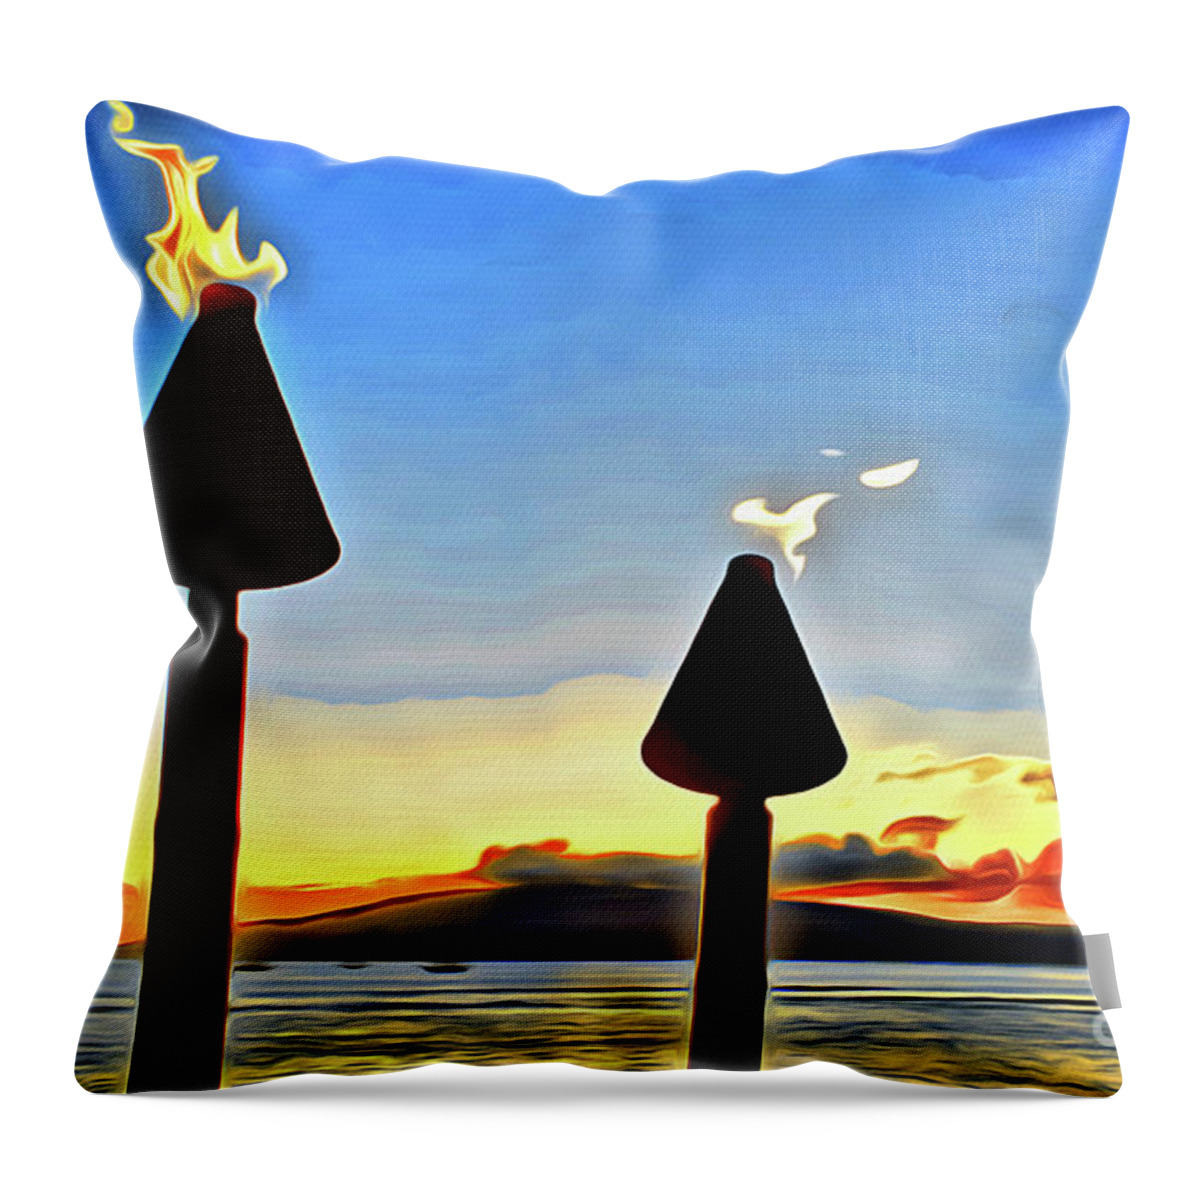 Island Throw Pillow featuring the photograph Perfect View At Sunset by Jerome Stumphauzer